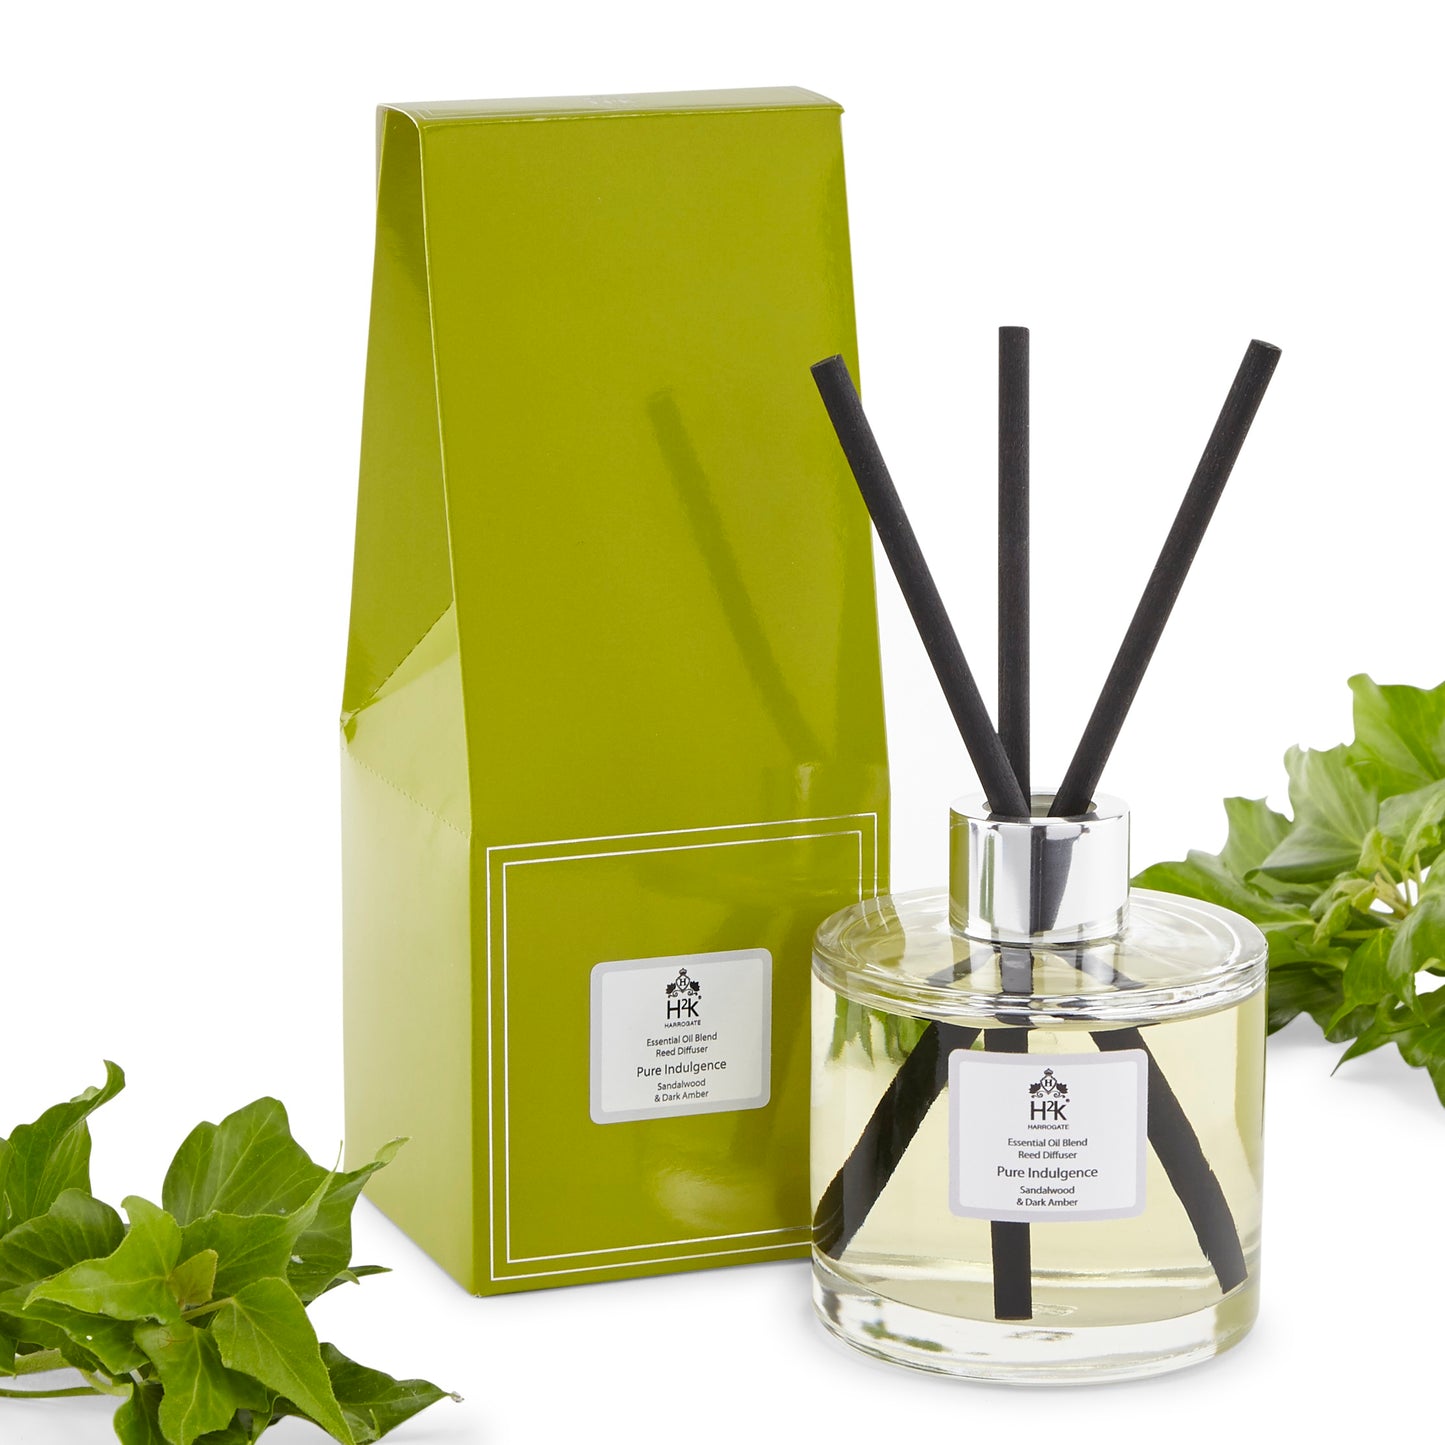 Dark Amber and Sandalwood Reed Diffuser an Essence of Pure Indulgence